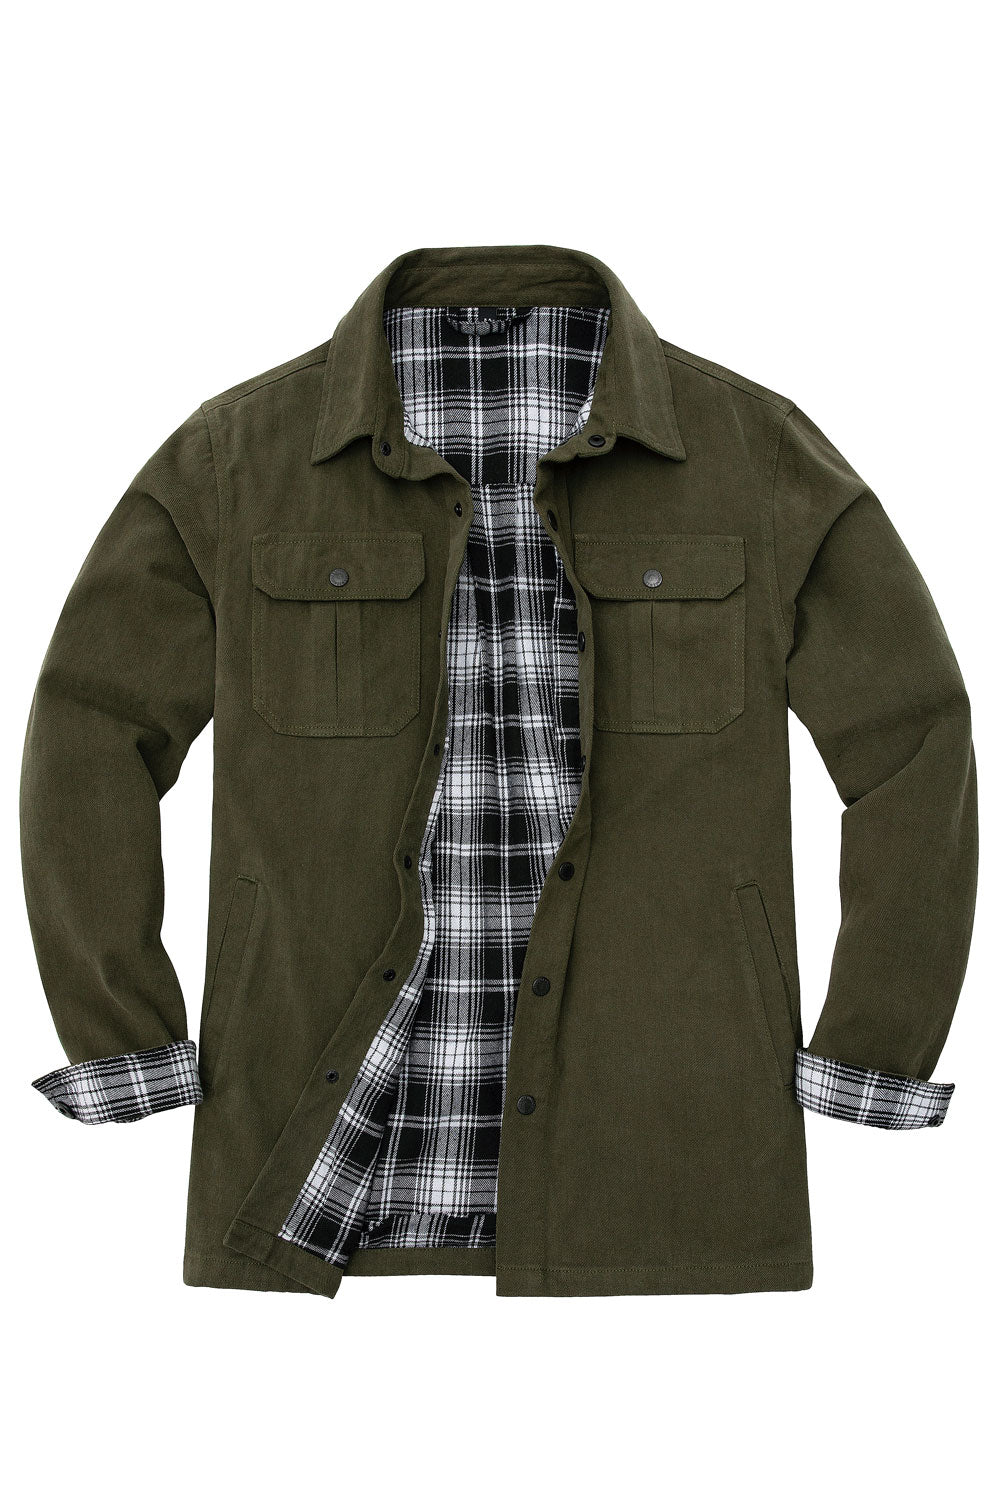 Men's Flannel Lined Heavy Washed Cotton Outdoor Utility Shirt Jacket